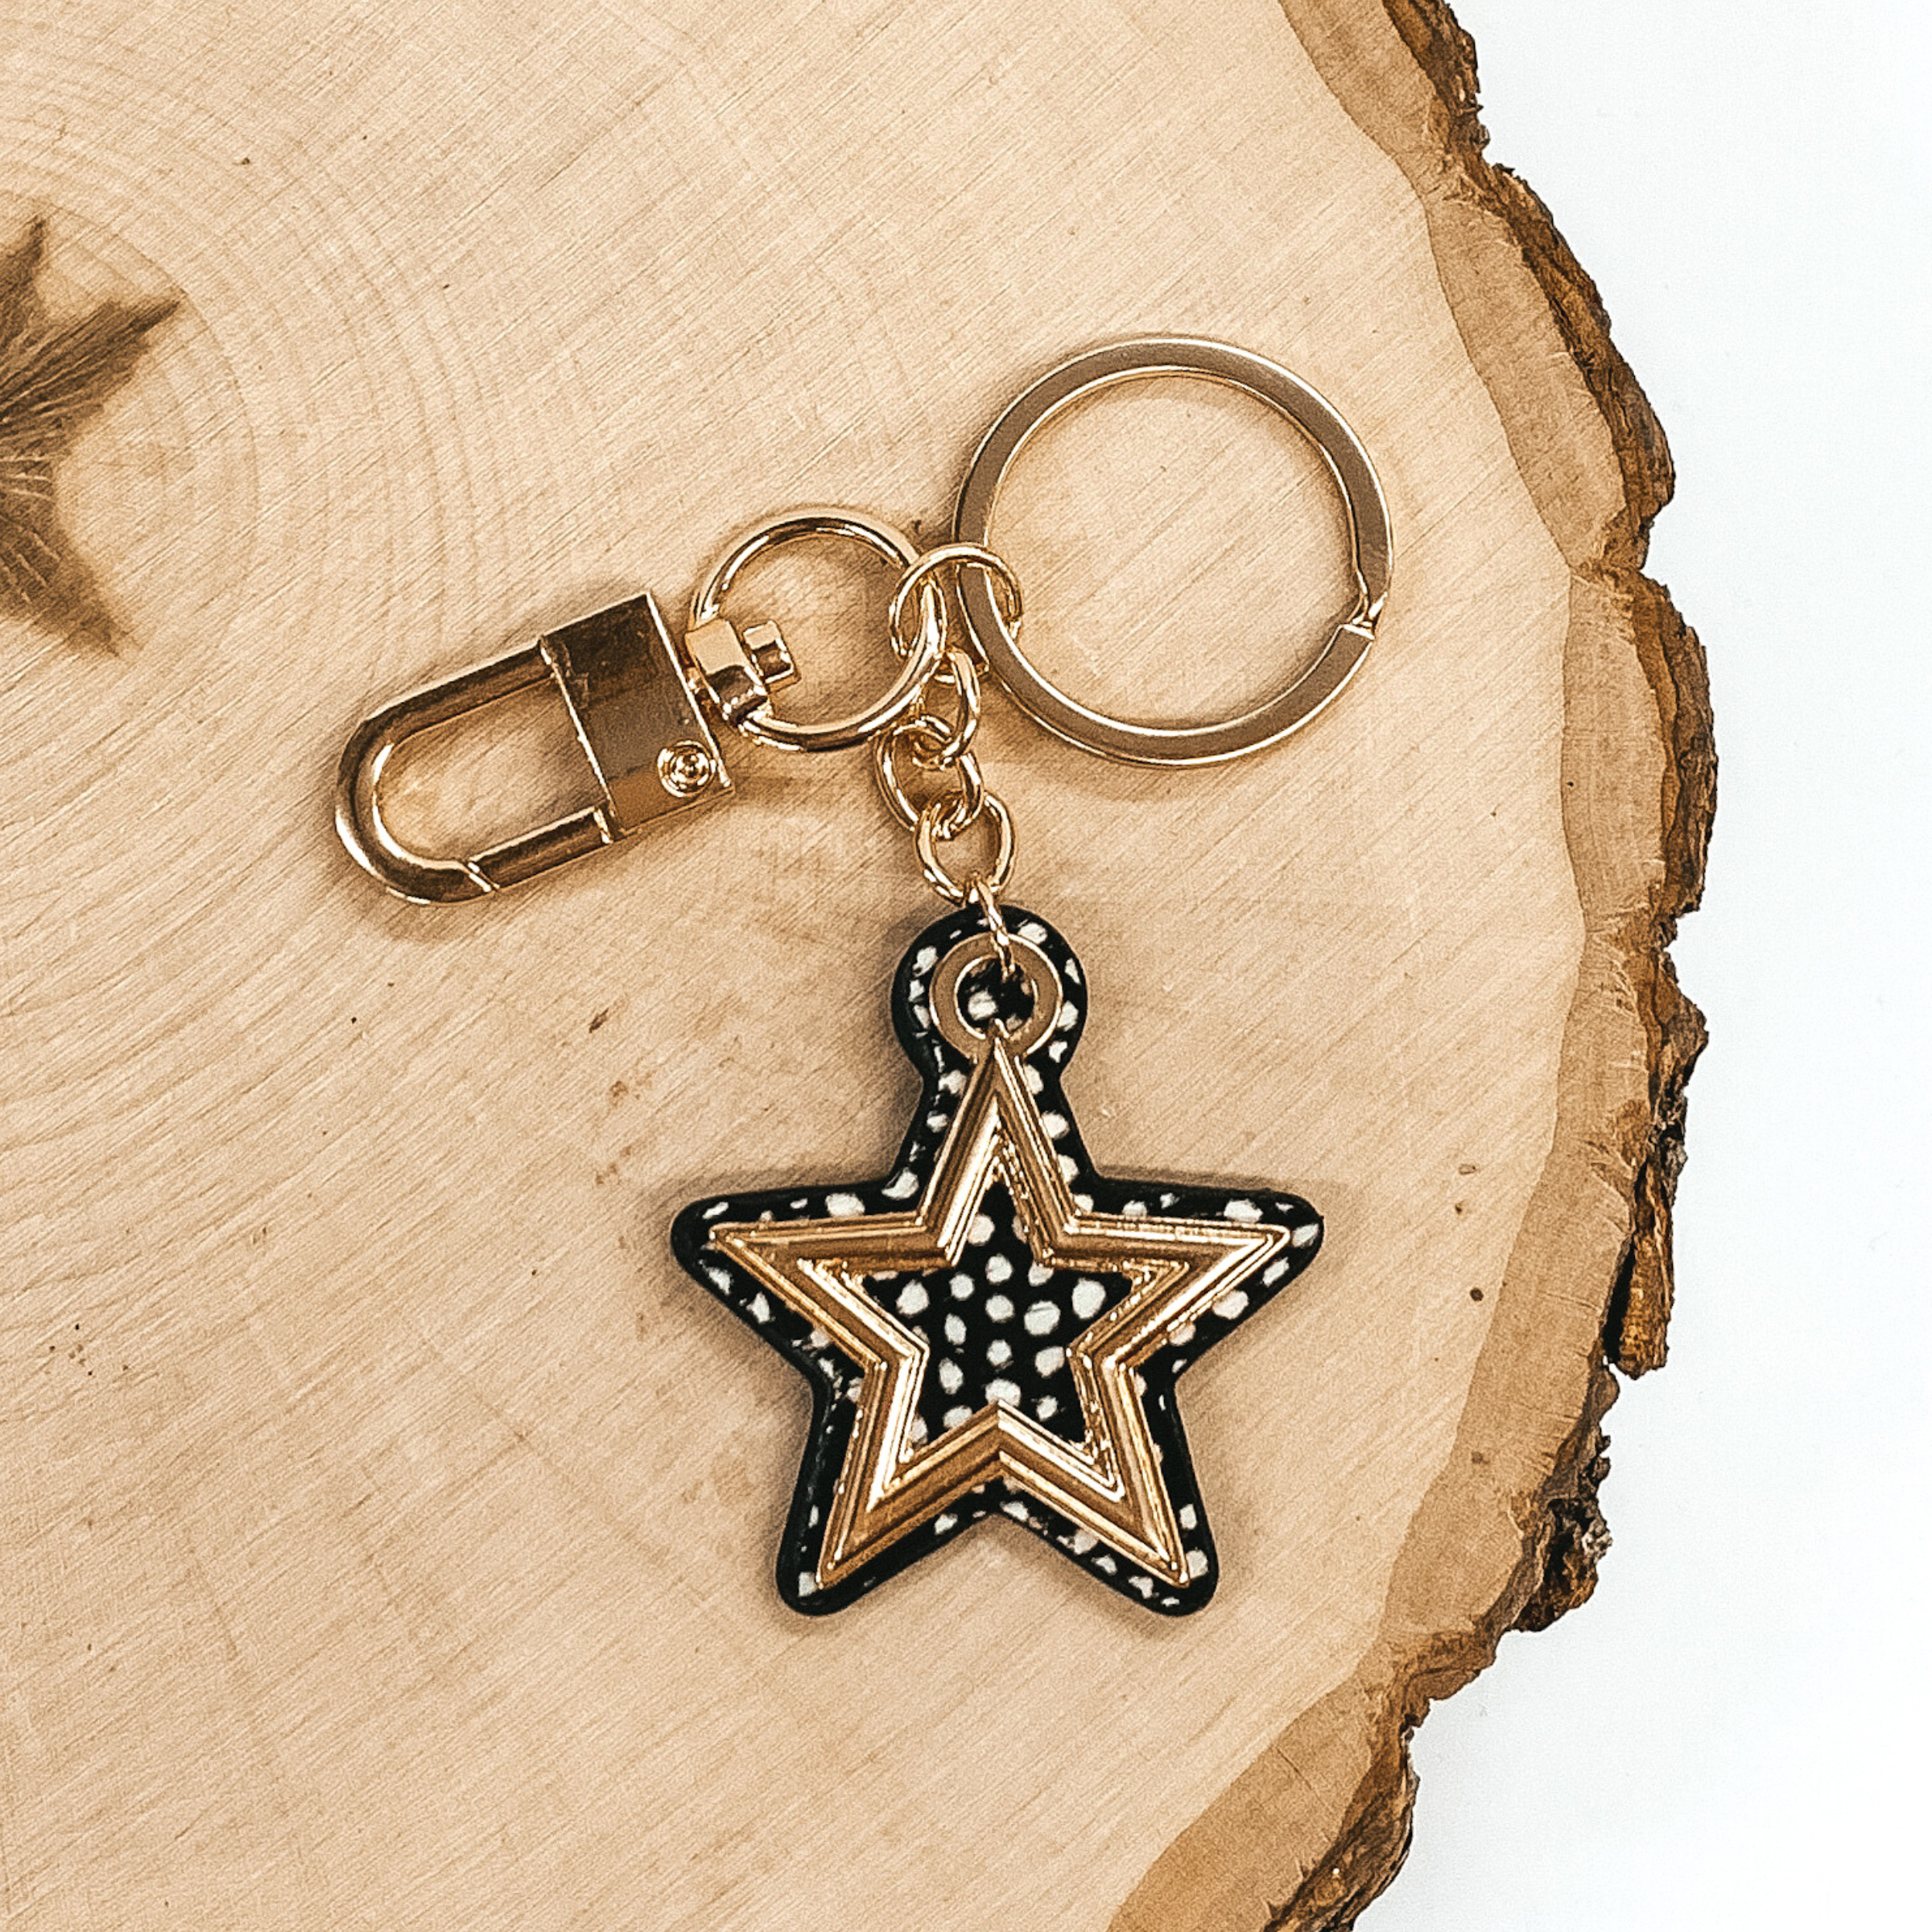 Gold key chain with a black hide inlay with white dotted print star pendant that includes a gold star outline. This key chain is pictured on a piece of wood on a white background.